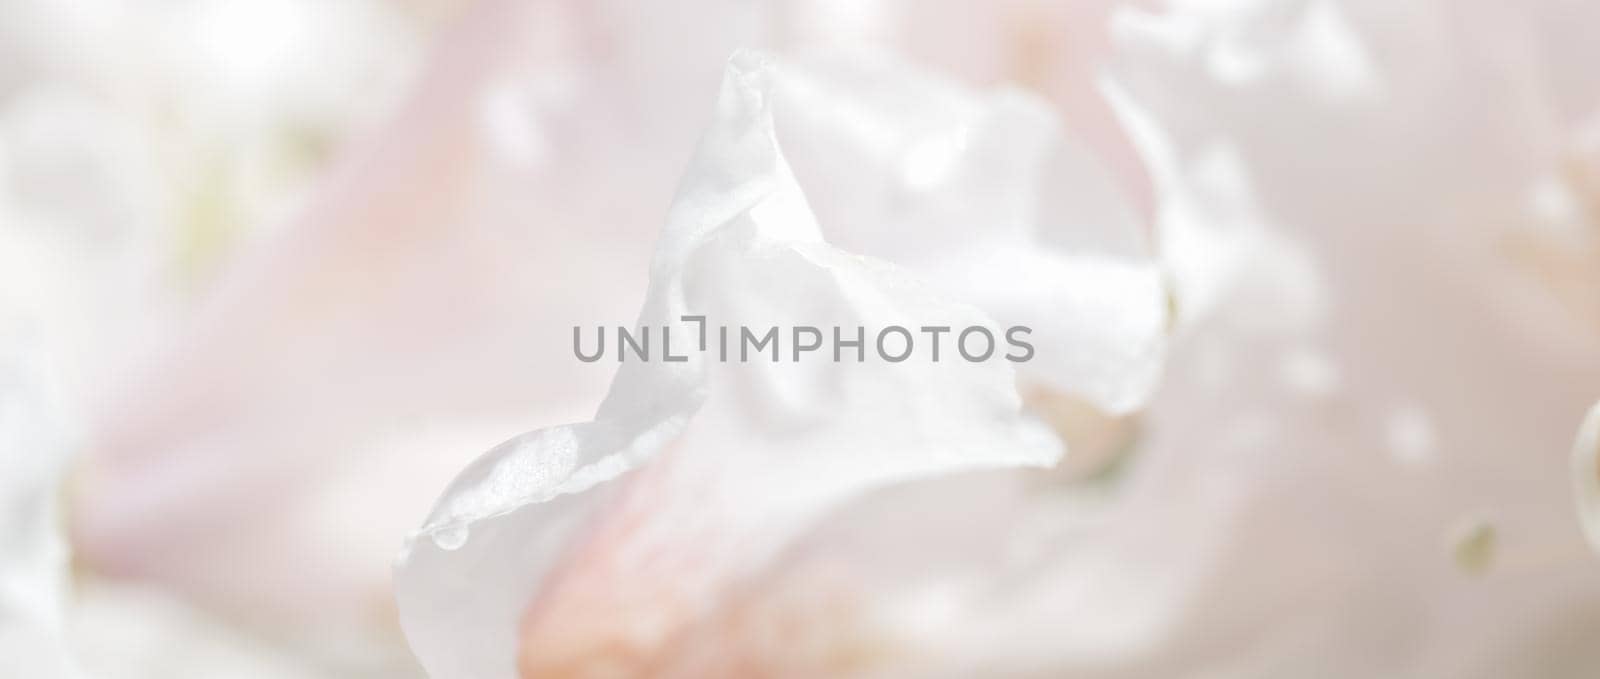 Soft focus, abstract floral background, white Rhododendron flower petals. Macro flowers backdrop for holiday brand design by Olayola